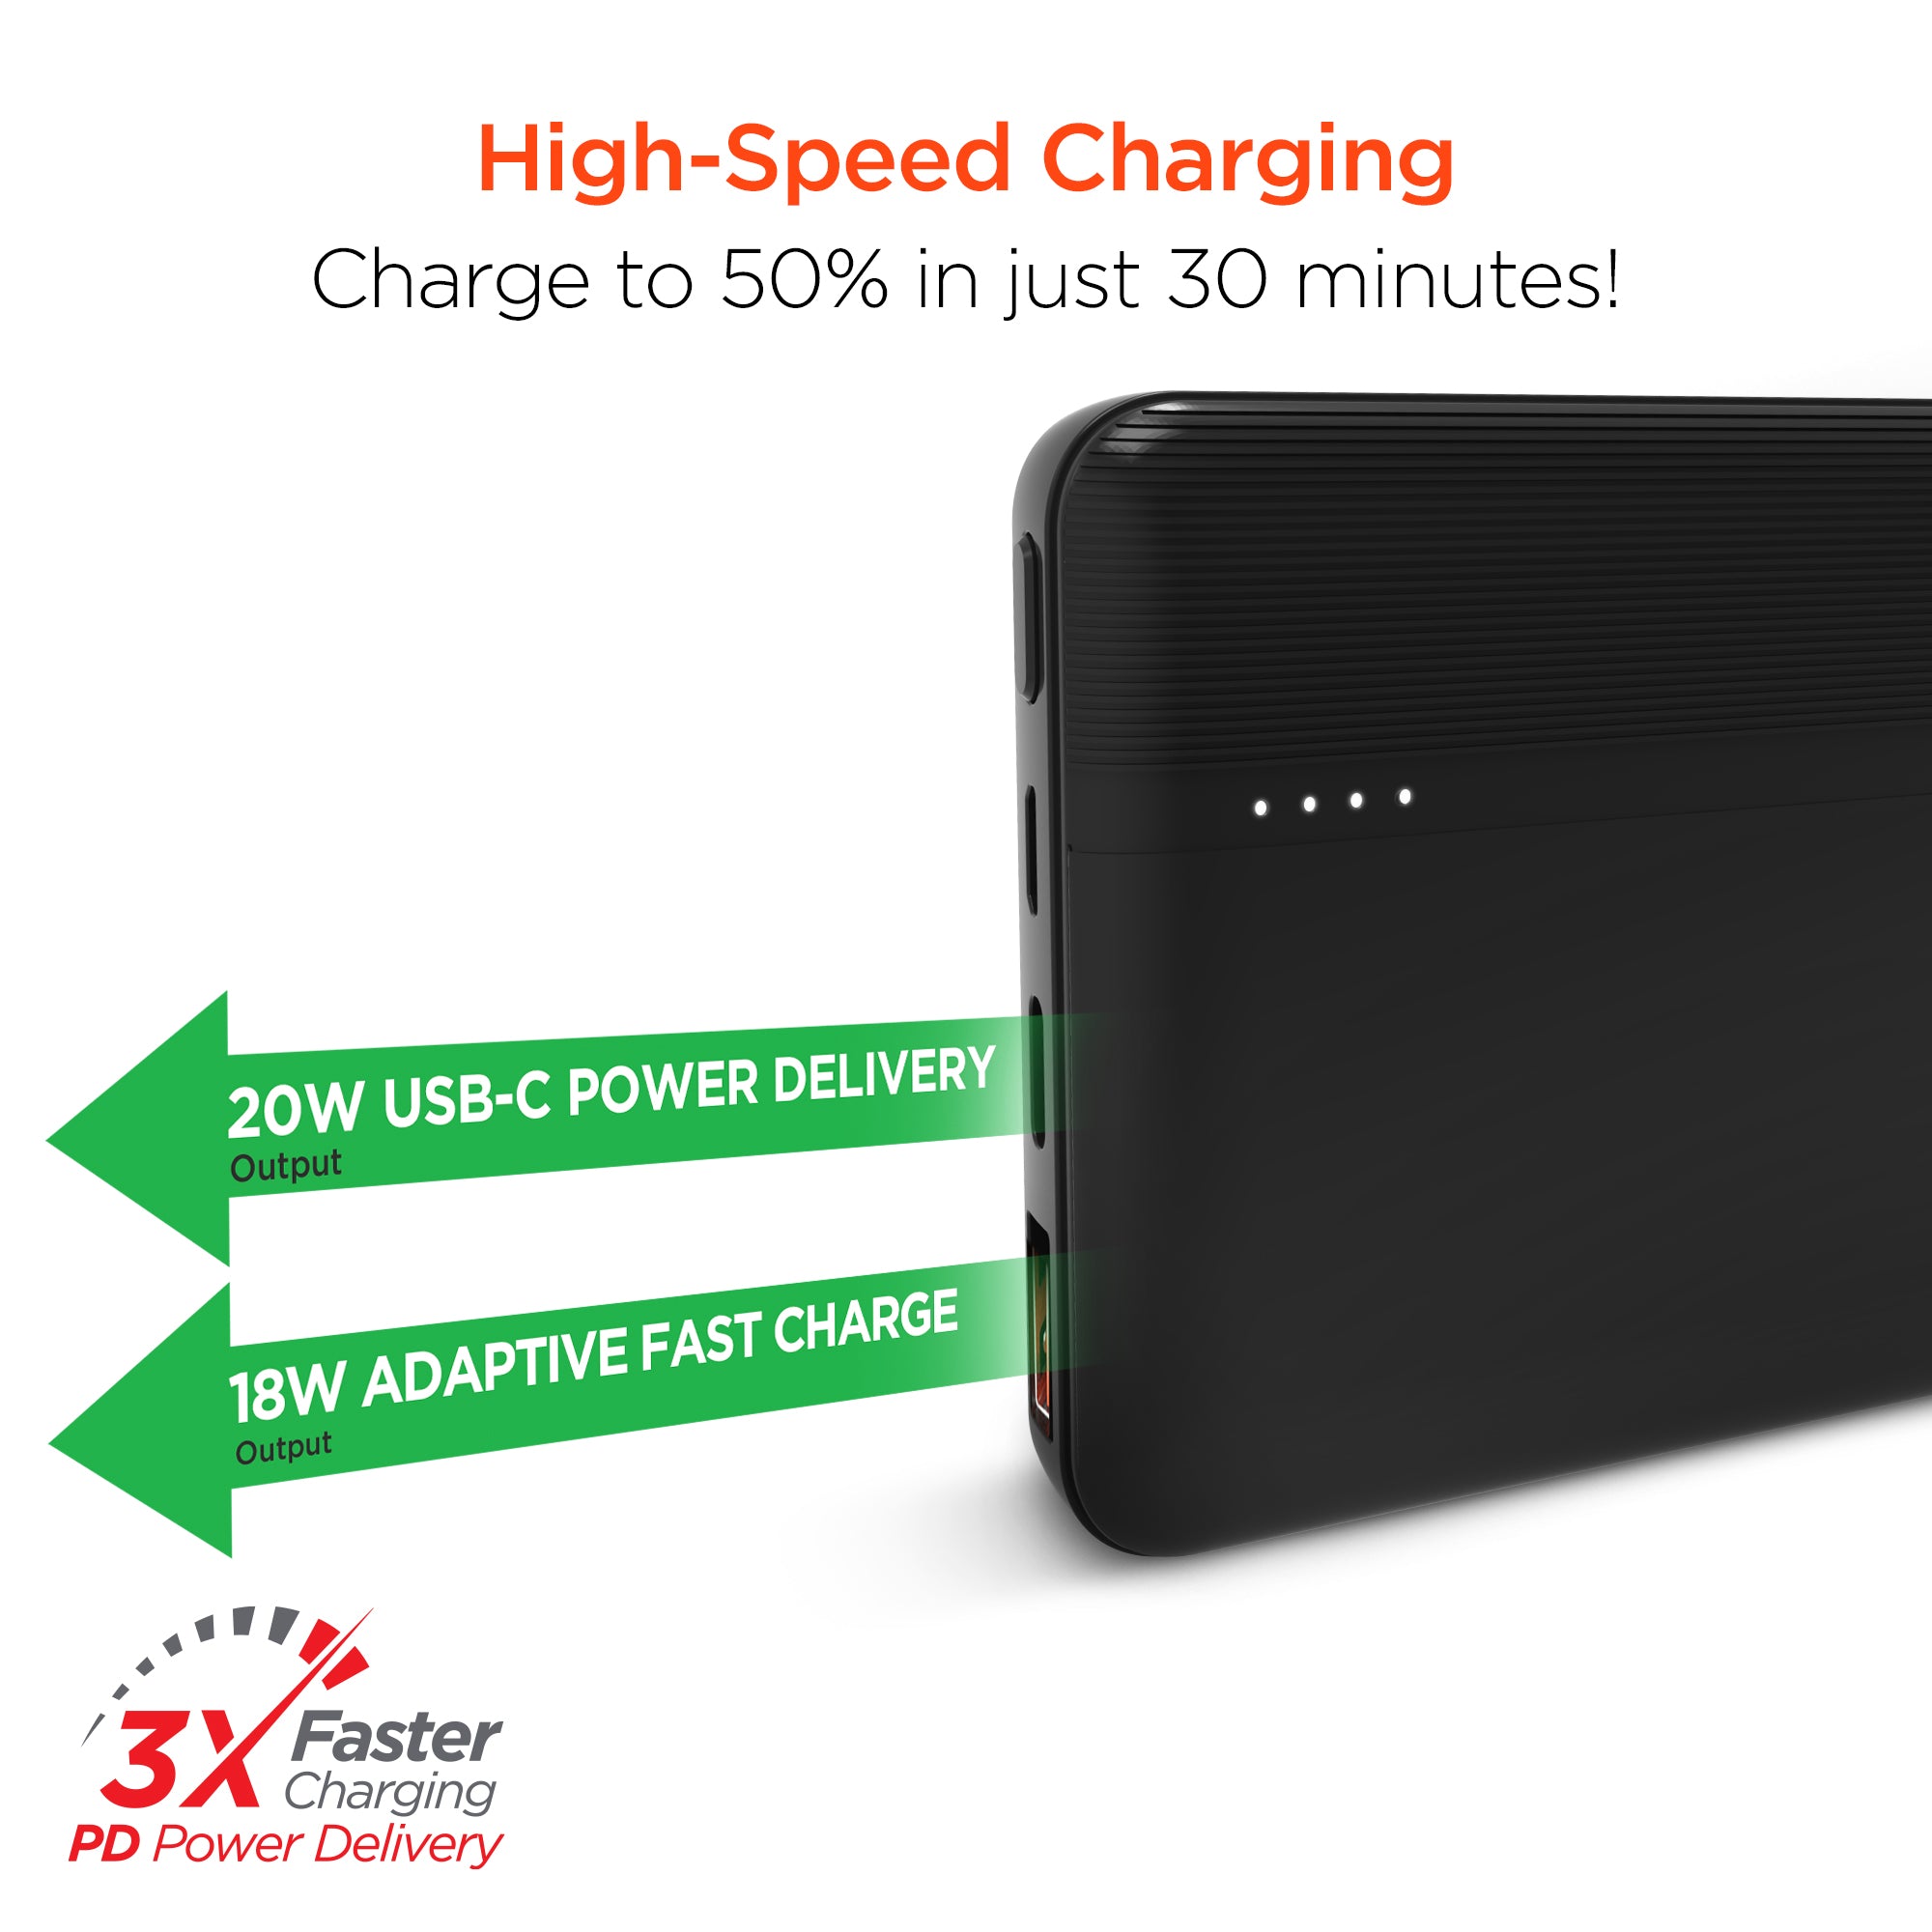 10,000mAh, Fast Charge Power Bank with 20W USB-C PD